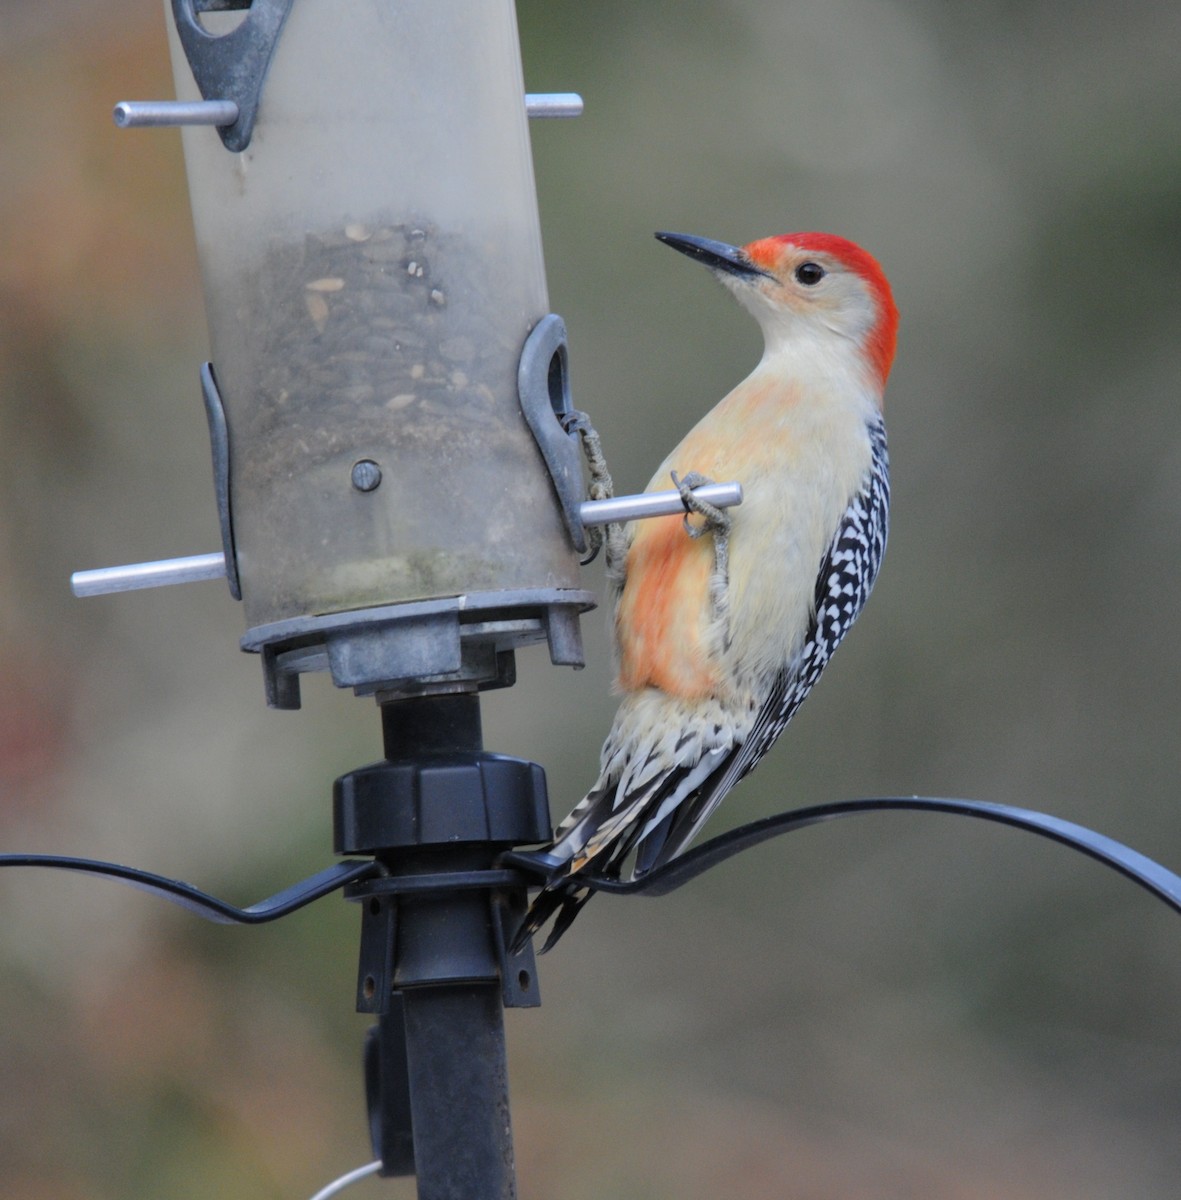 Red-bellied Woodpecker - Max  Chalfin-Jacobs